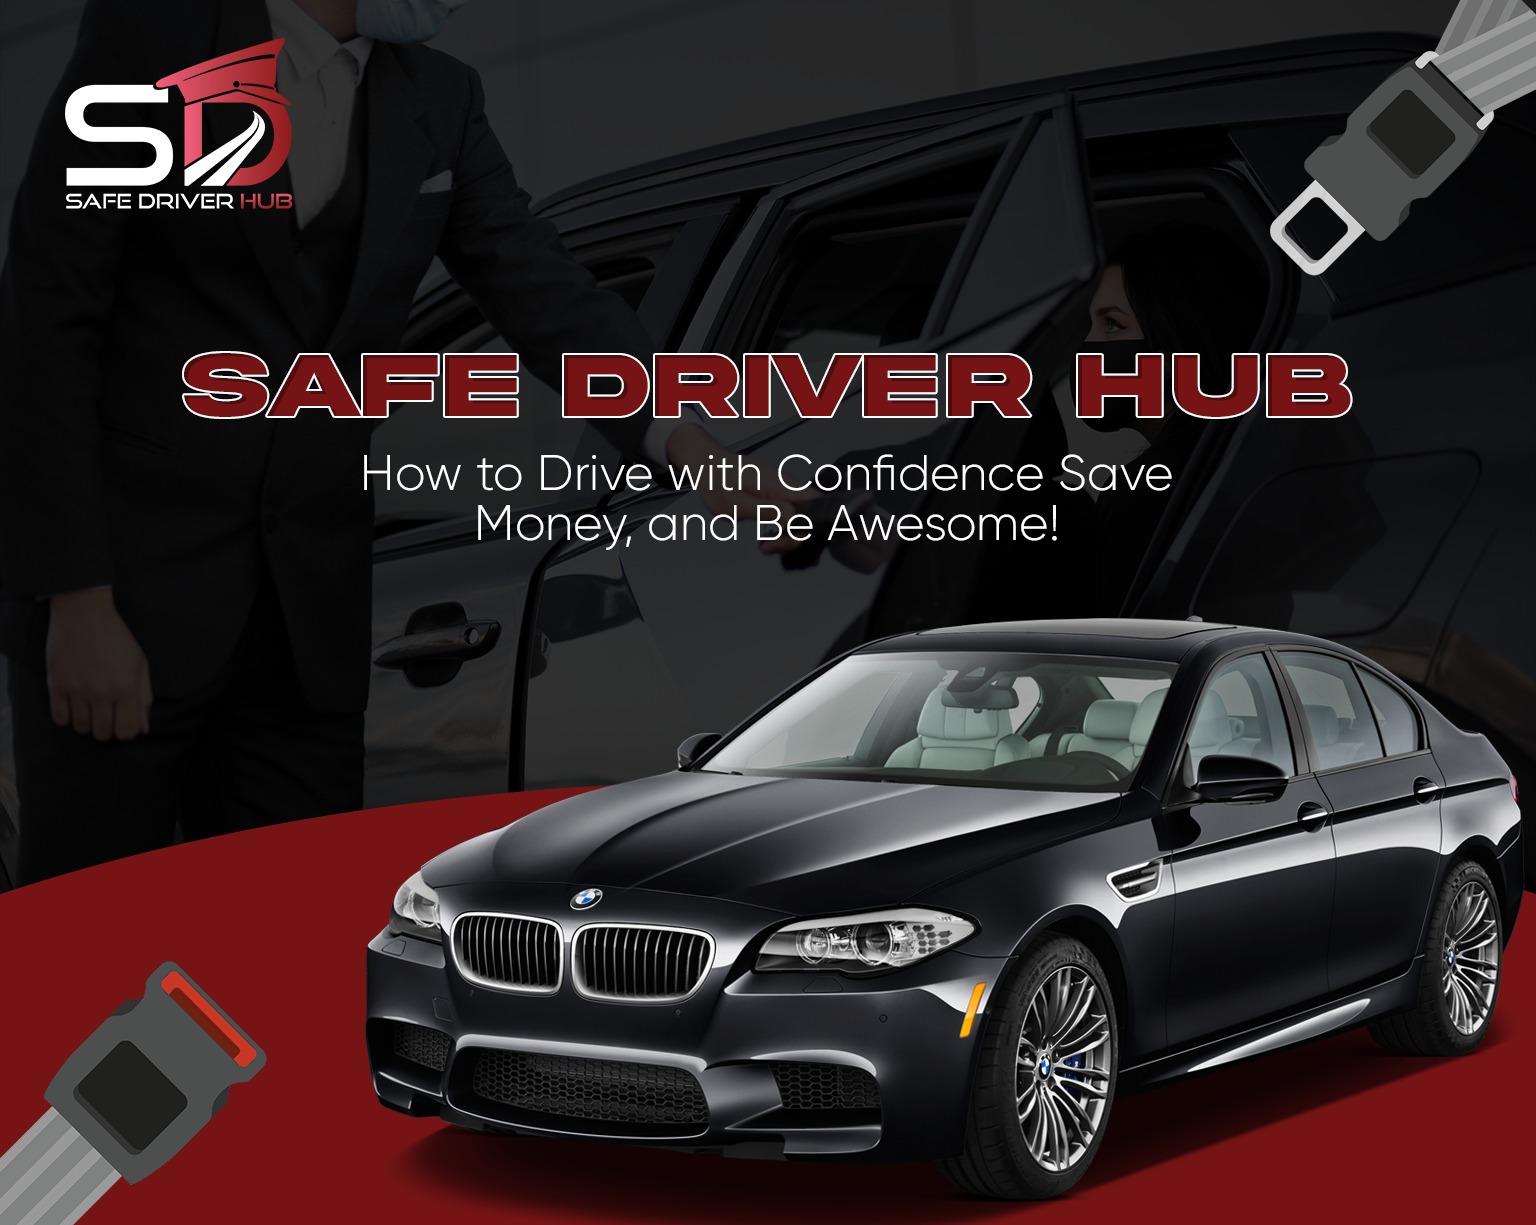 SafeDriver-Hub-How to-Drive-with- Confidence-Save-Money-and-Be-Awesome!